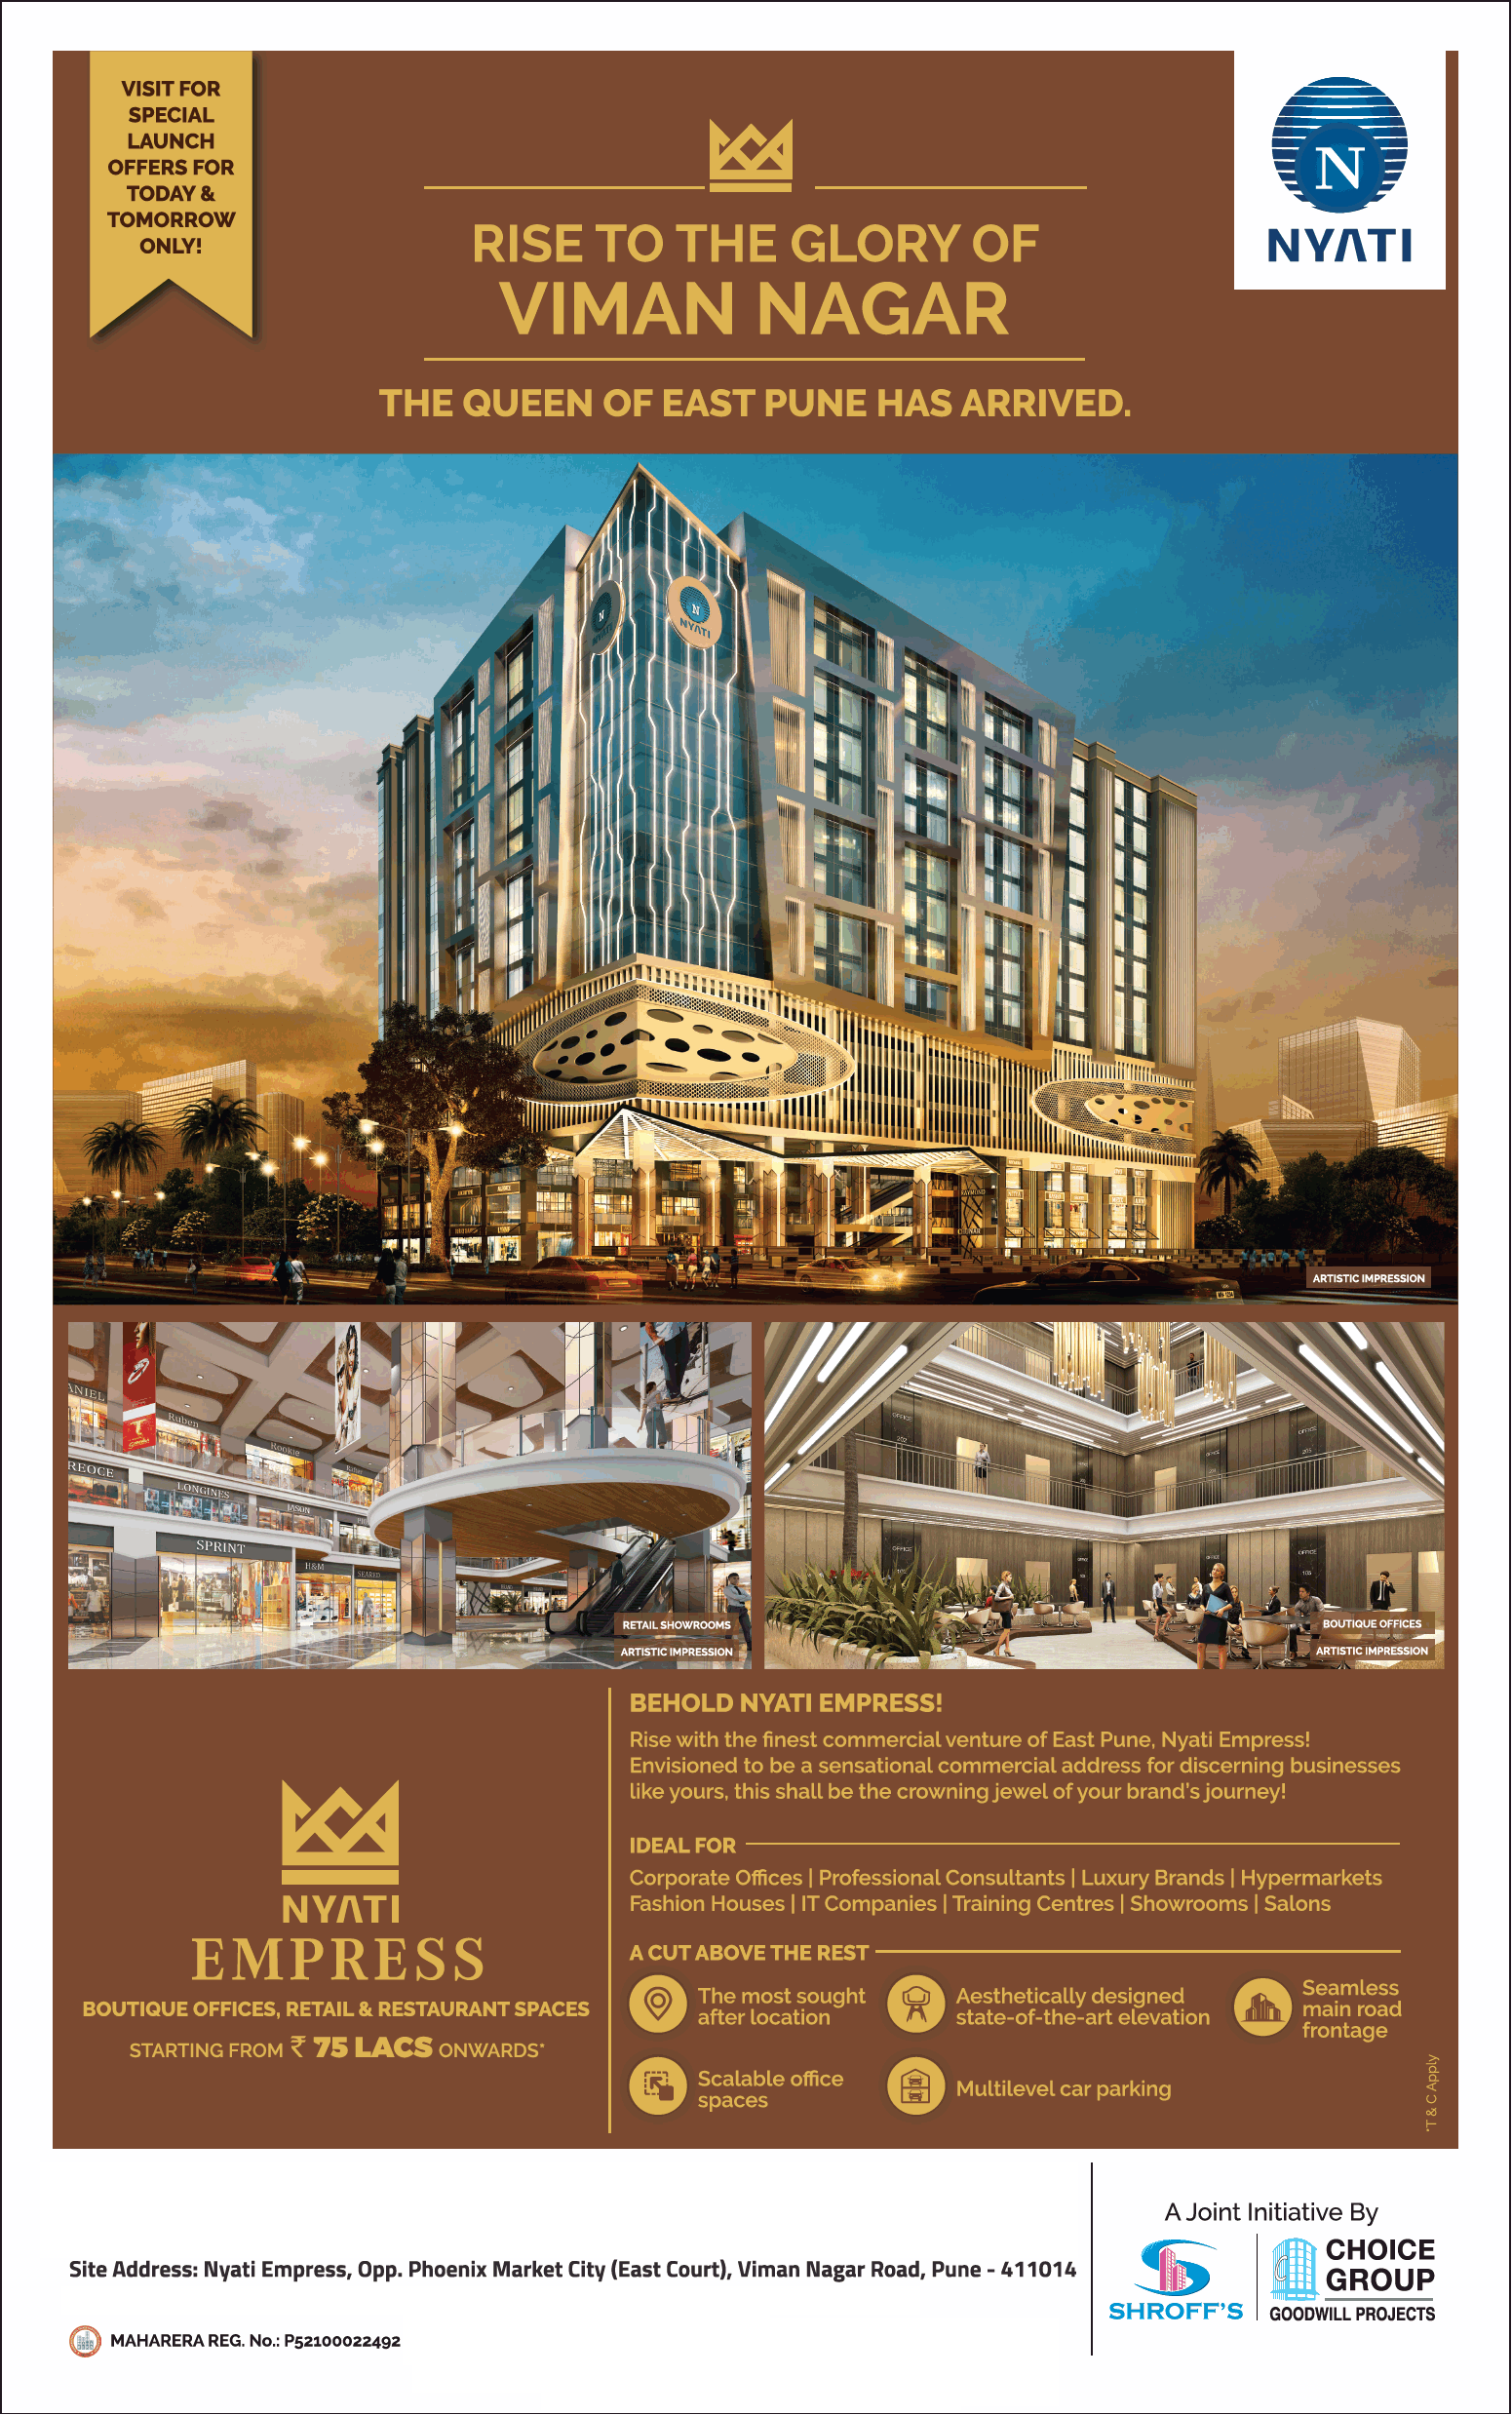 Boutique Offices, Retail and Restaurant spaces started from Rs 75 lakh onwards at Nyati Empress, Pune